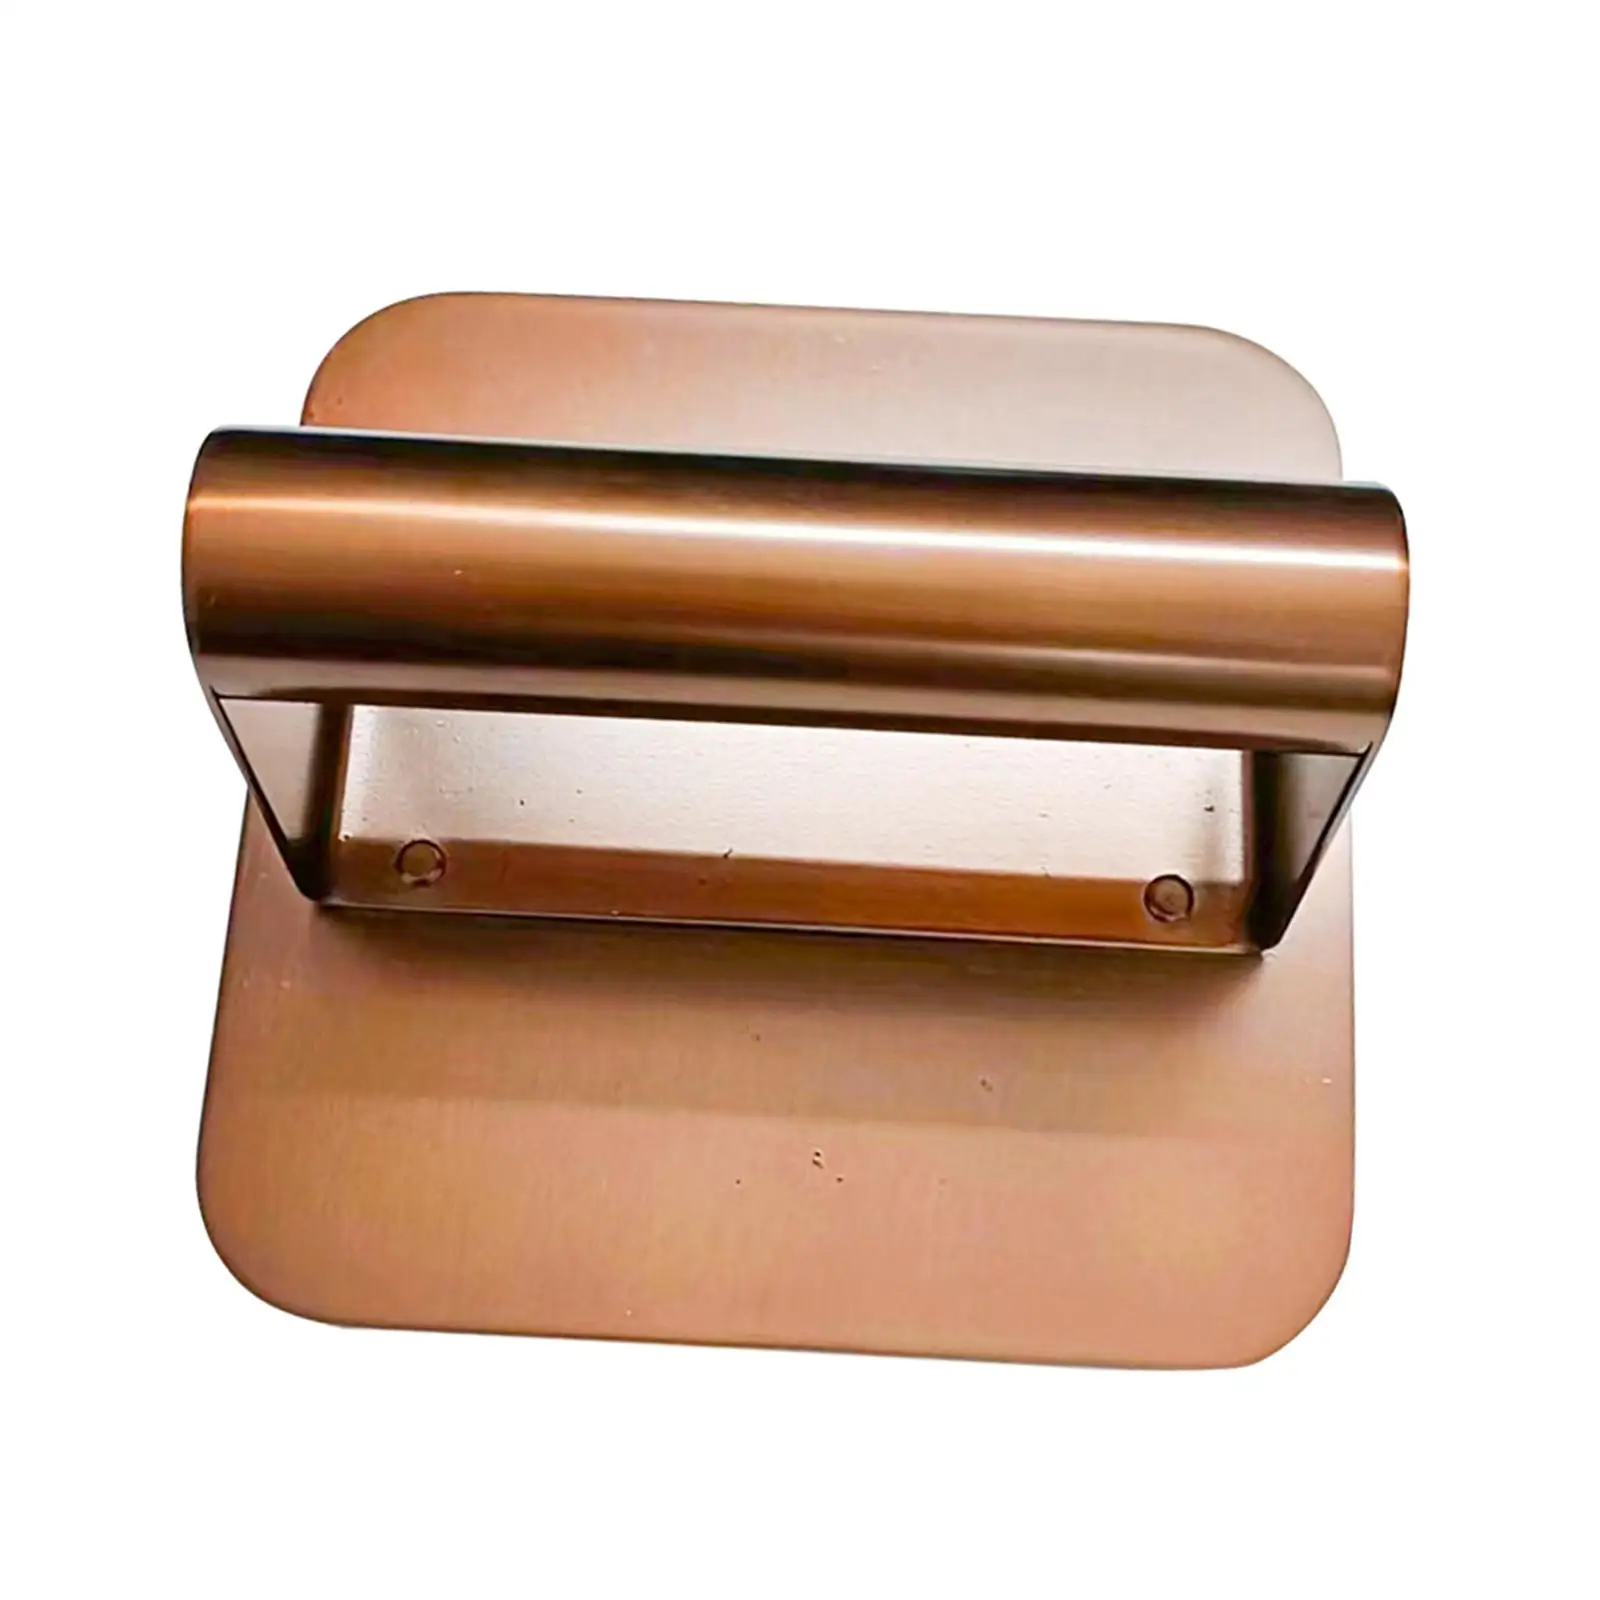 Kitchen burger press, meat steak press, smooth manual grilling accessories